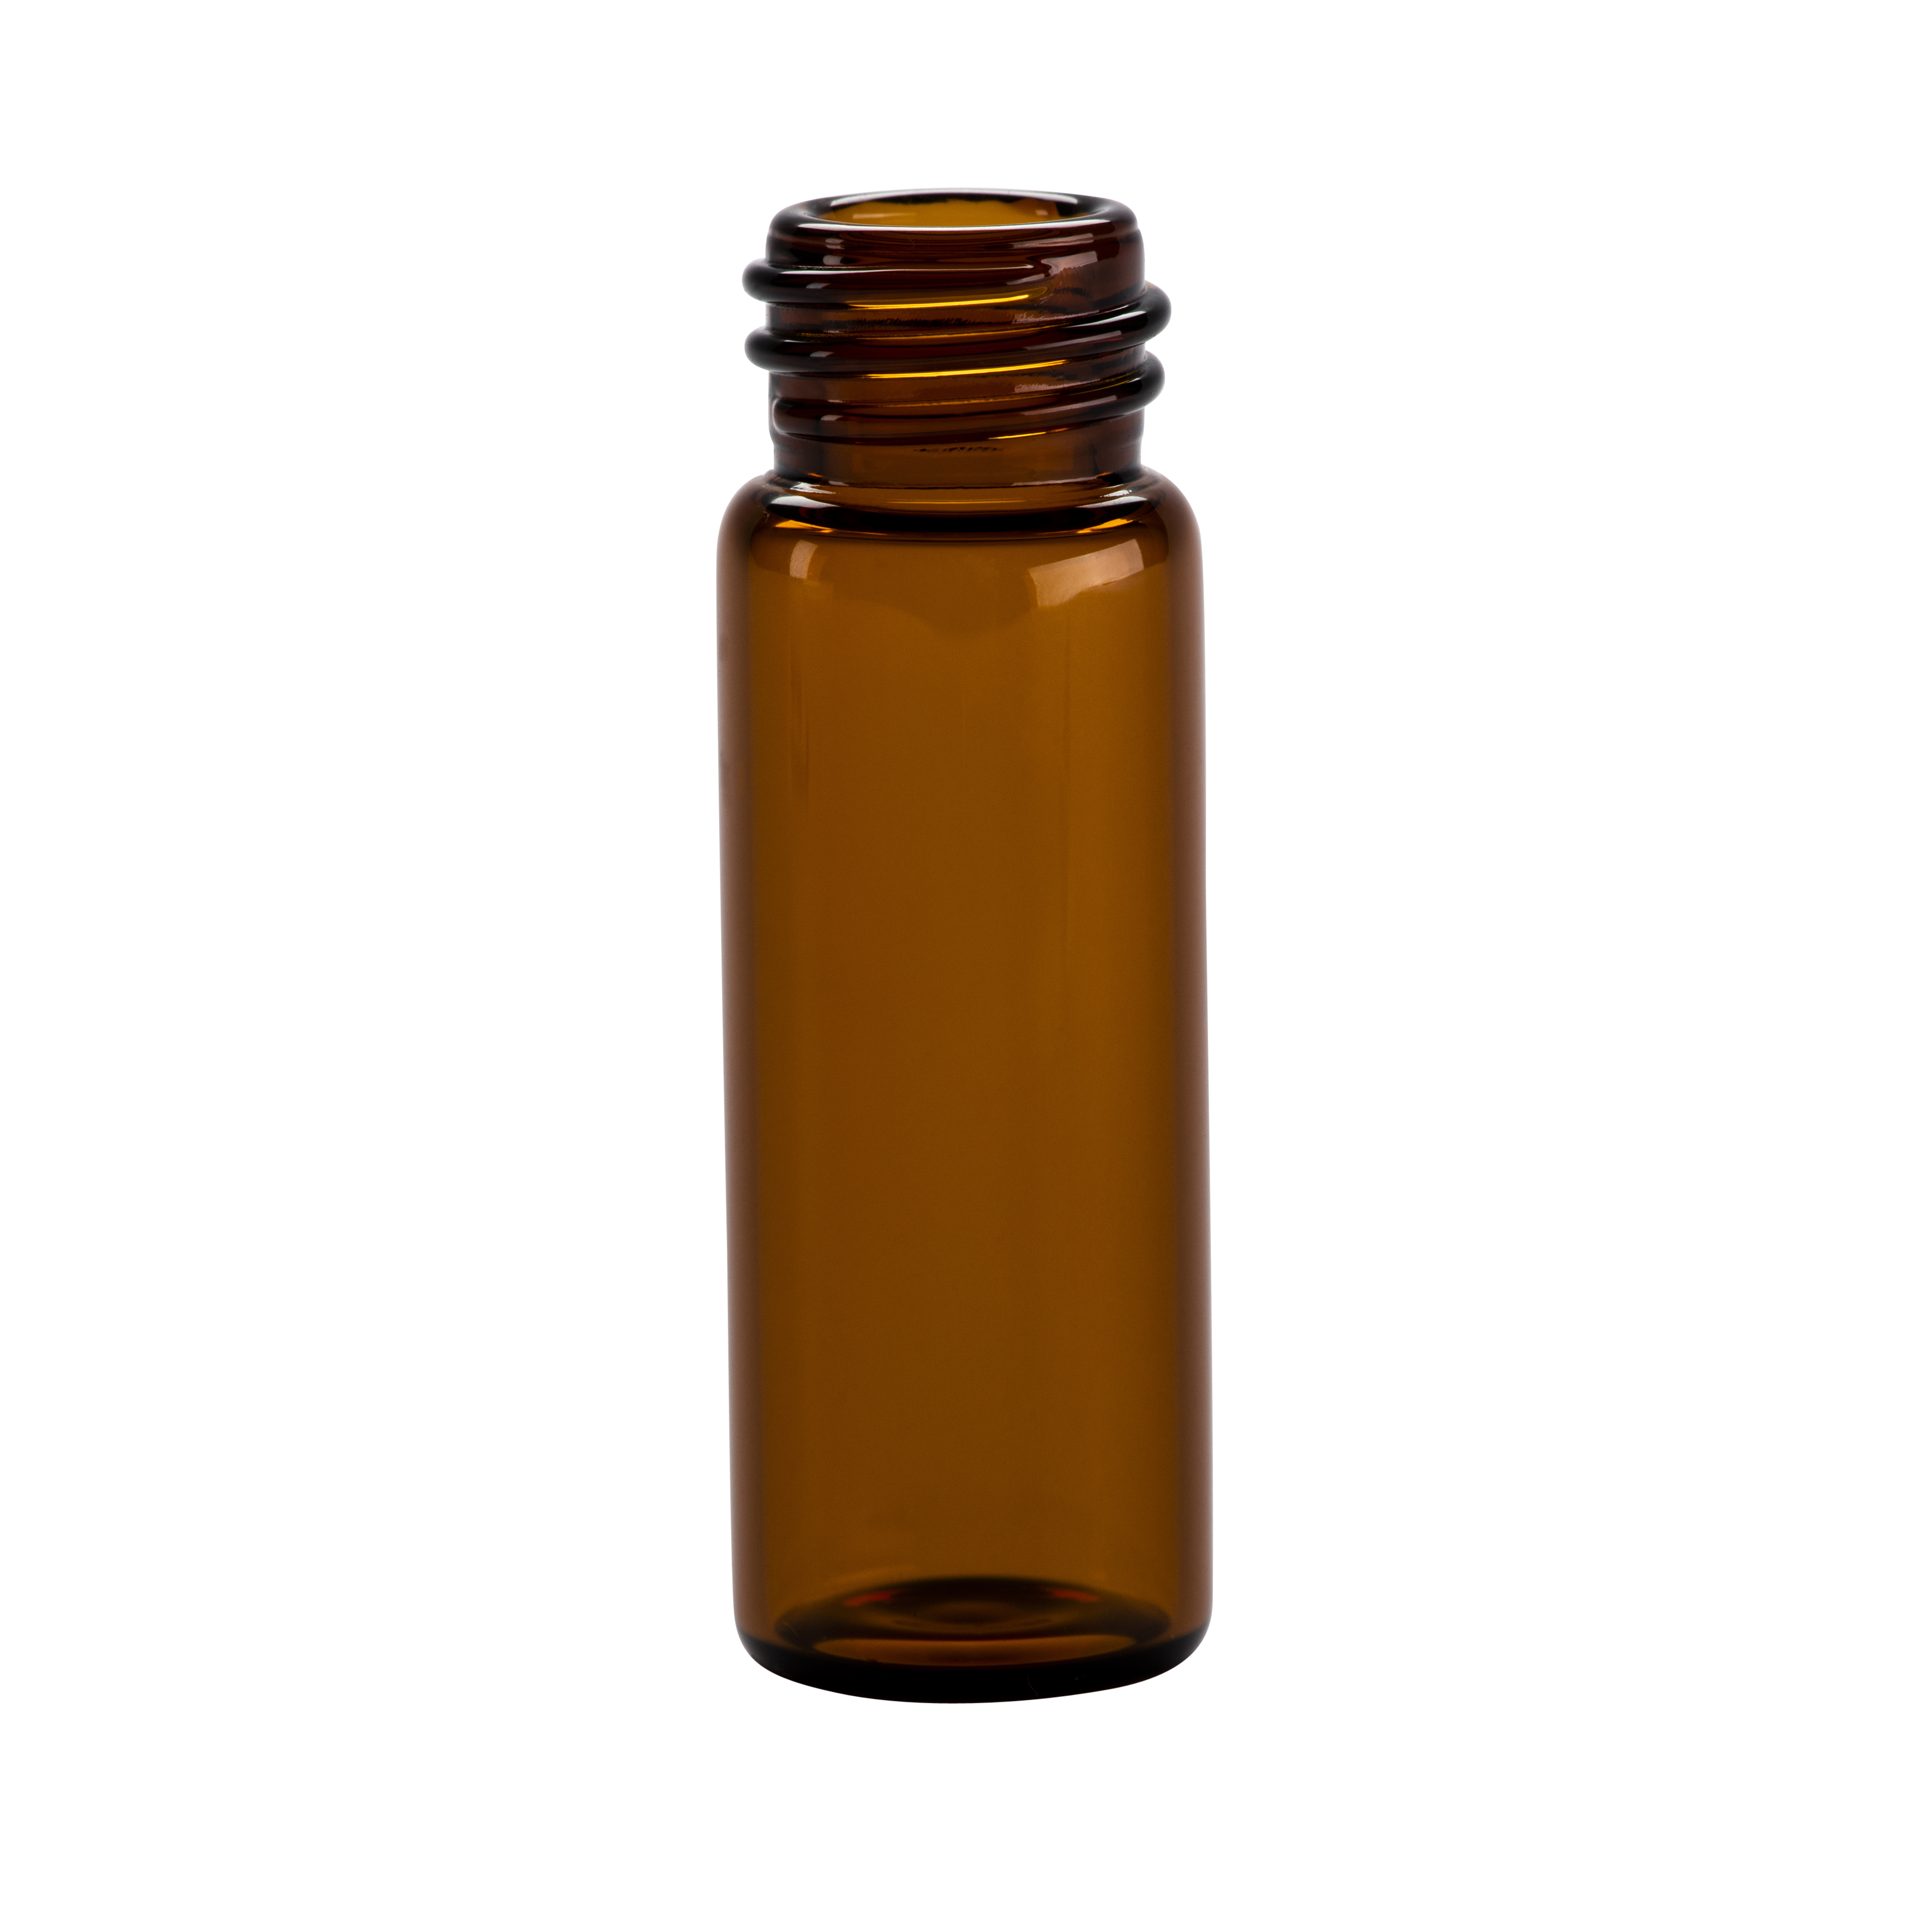 Small brown glass container with screw lid